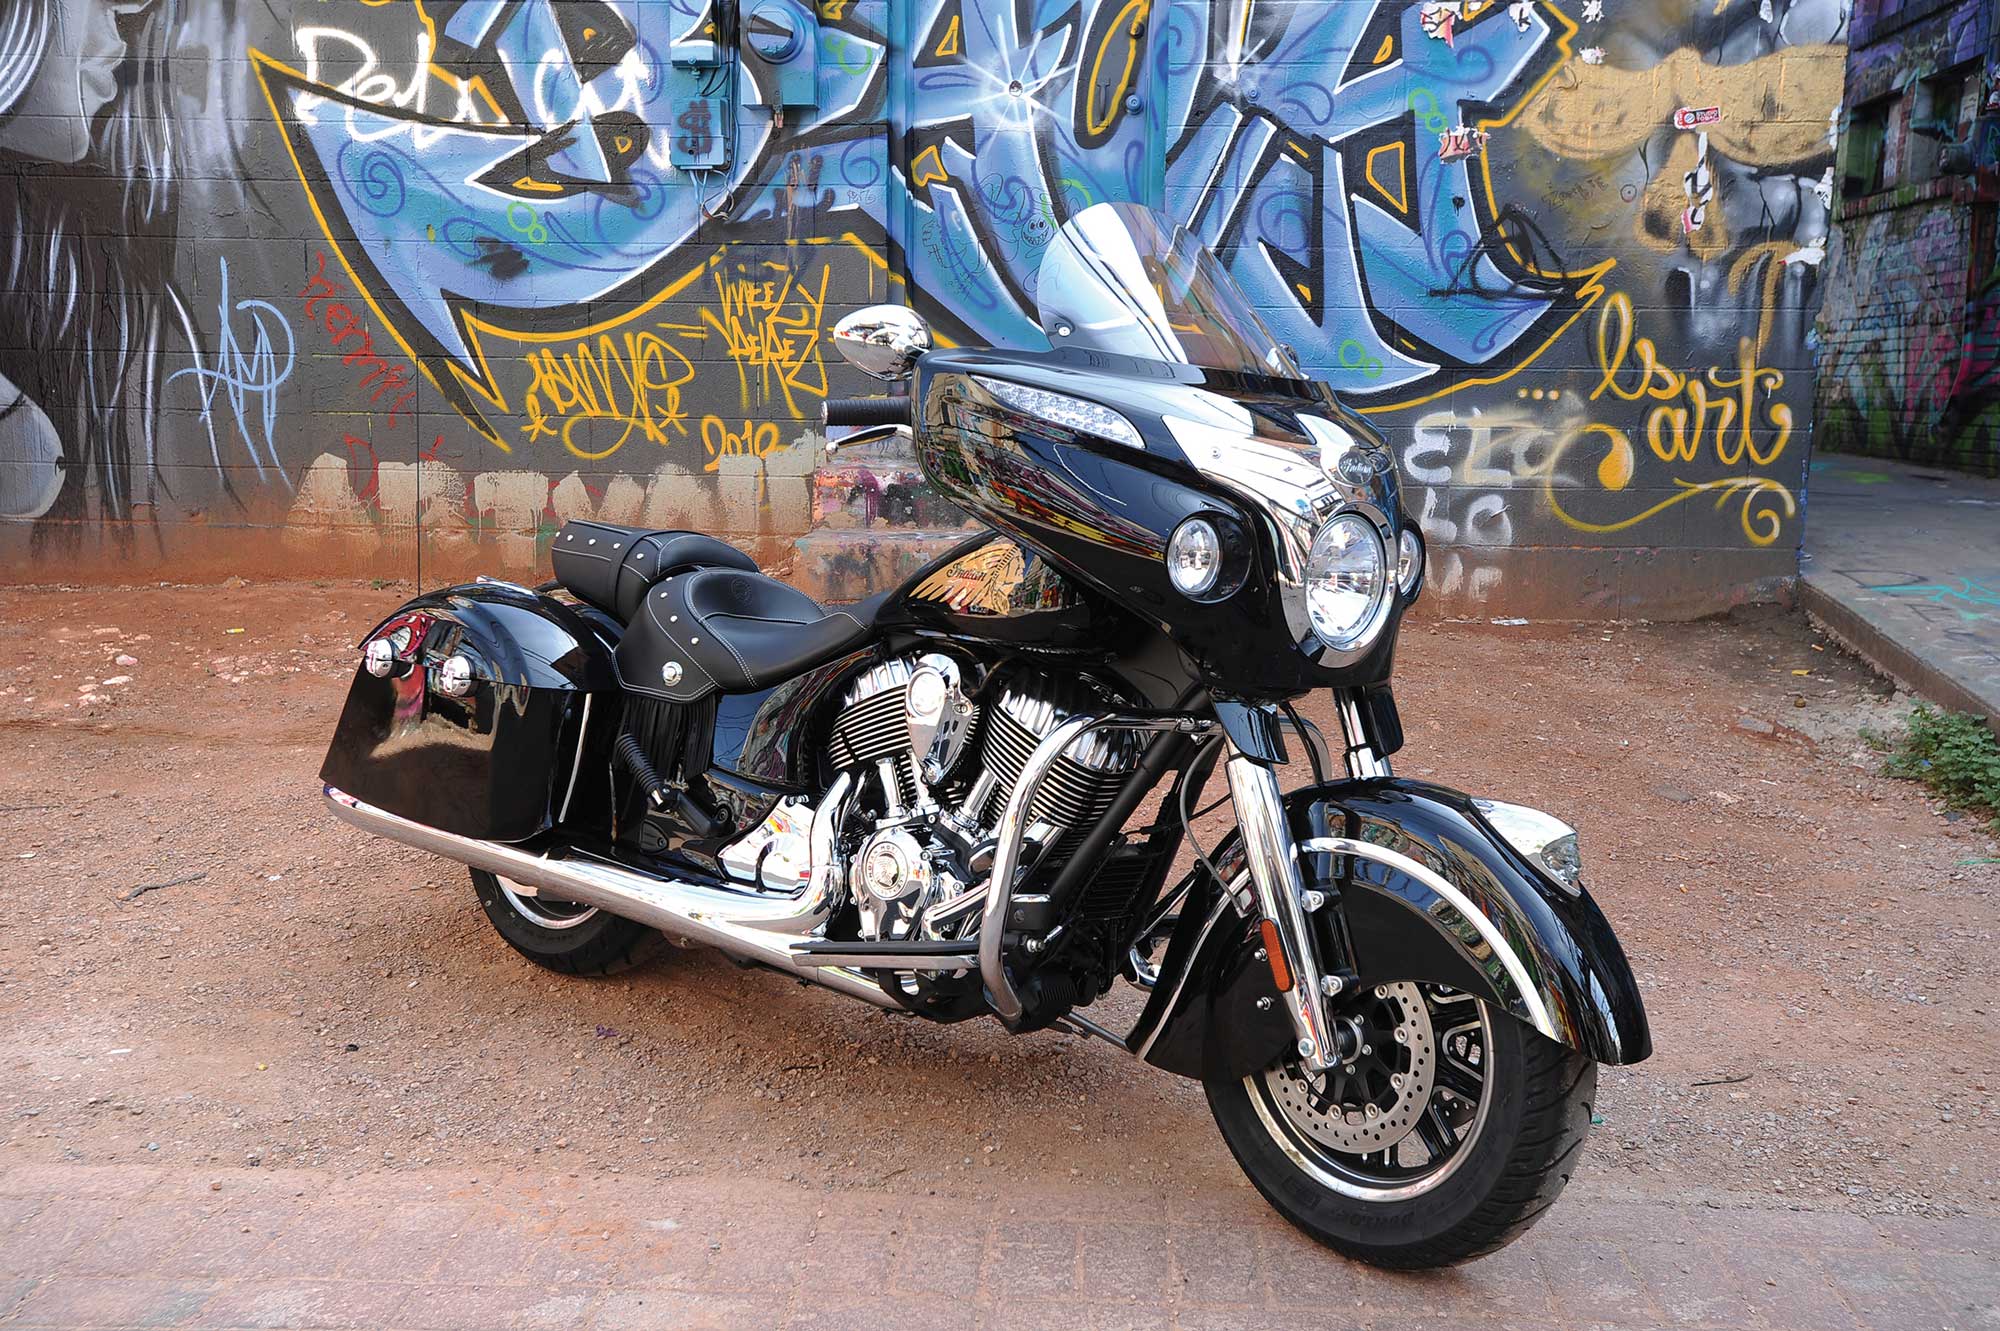 Indian Chieftain Backgrounds, Compatible - PC, Mobile, Gadgets| 2000x1331 px